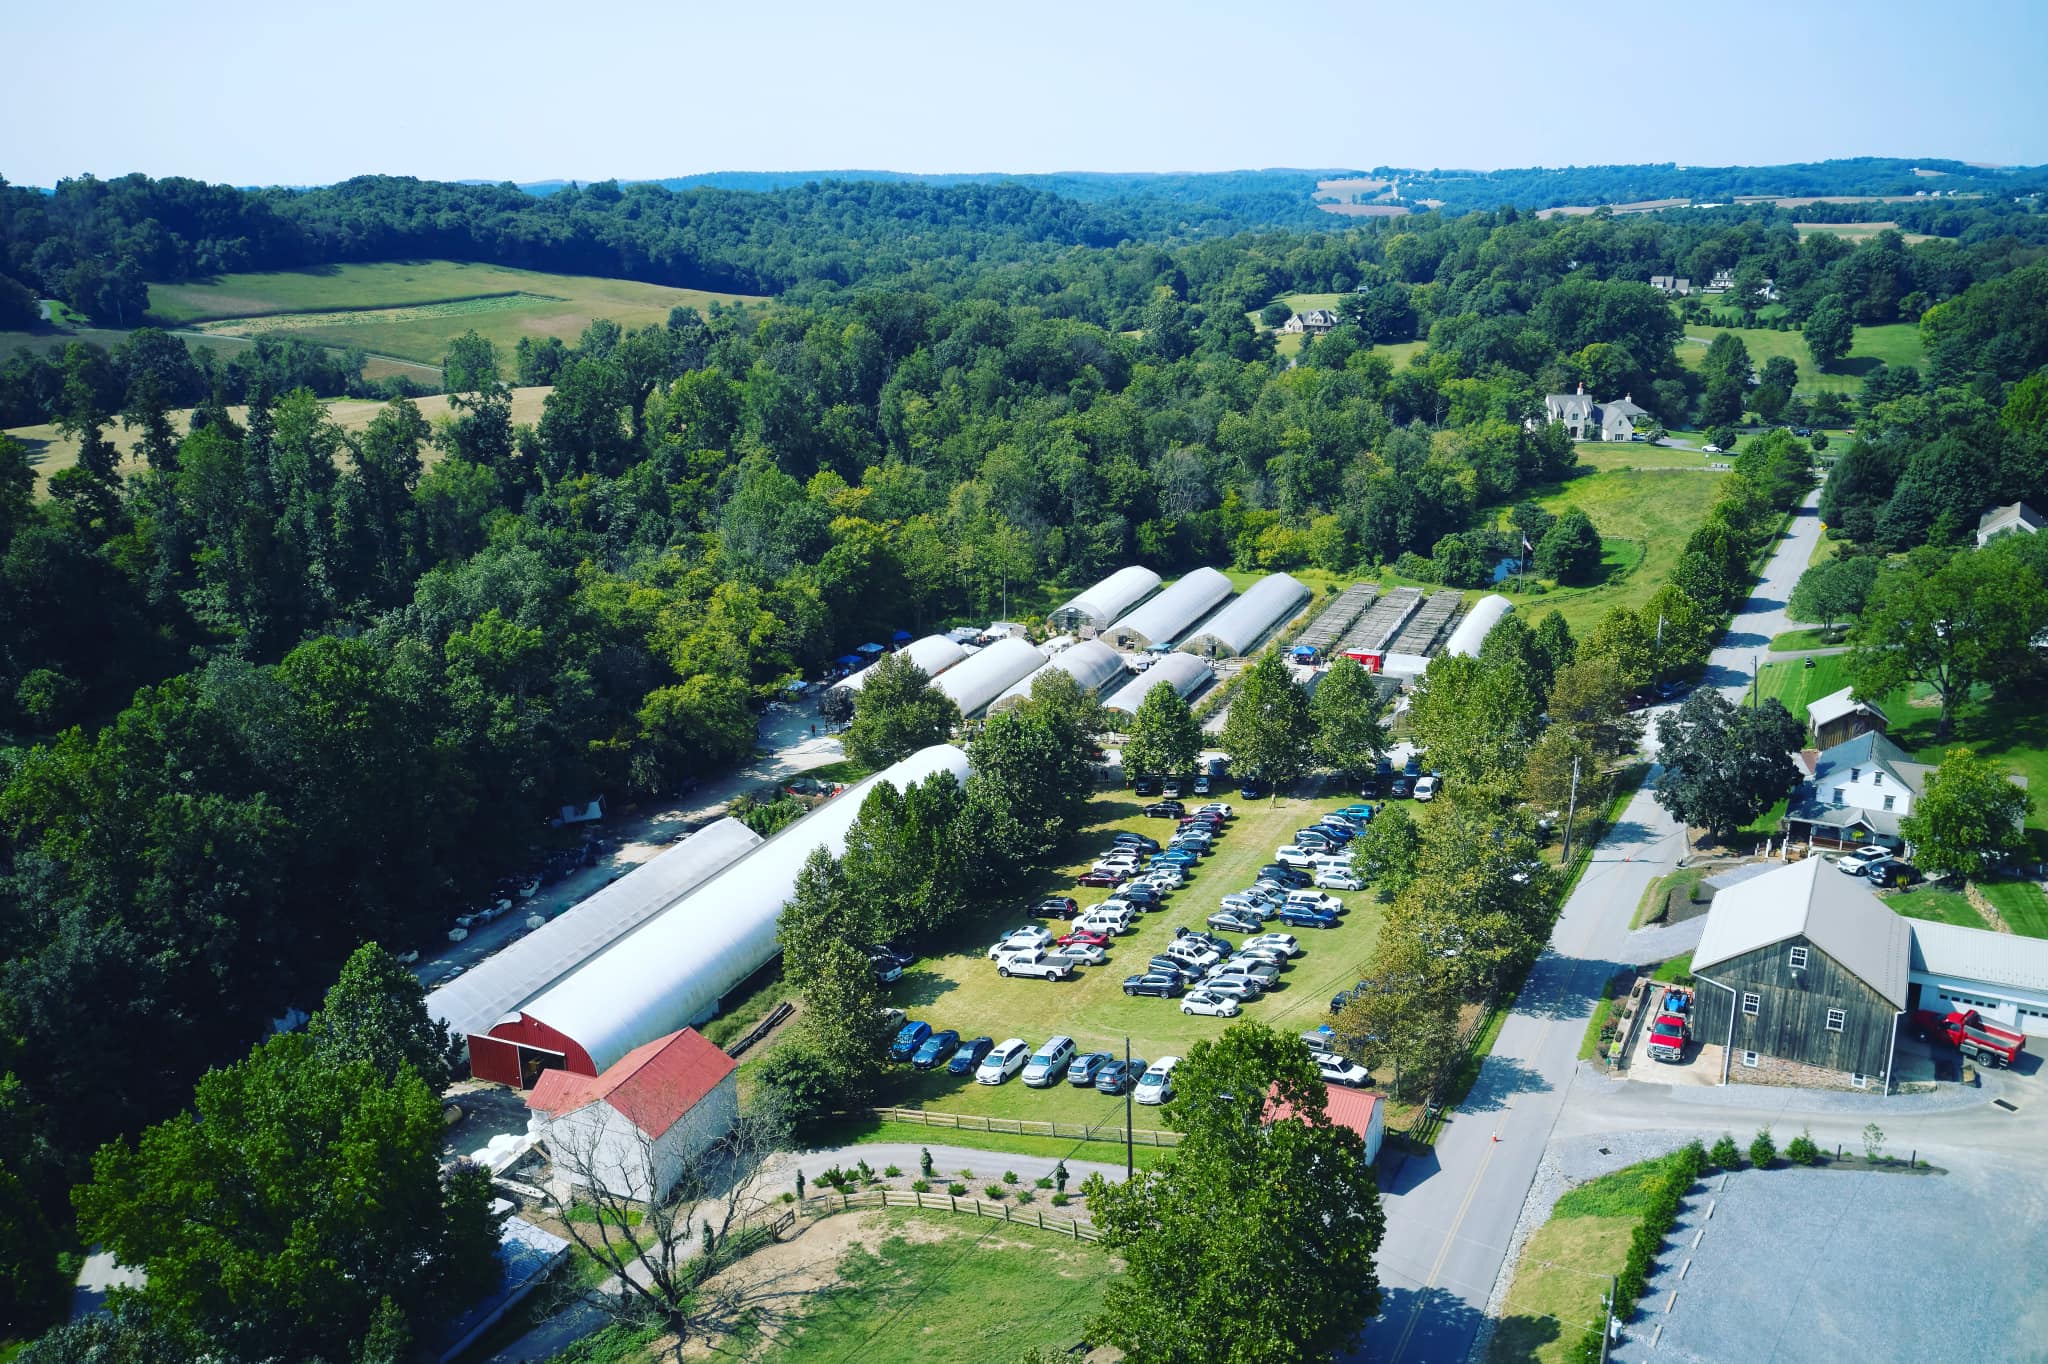 Birds eye view of Tudbink's Farm and greenhouses